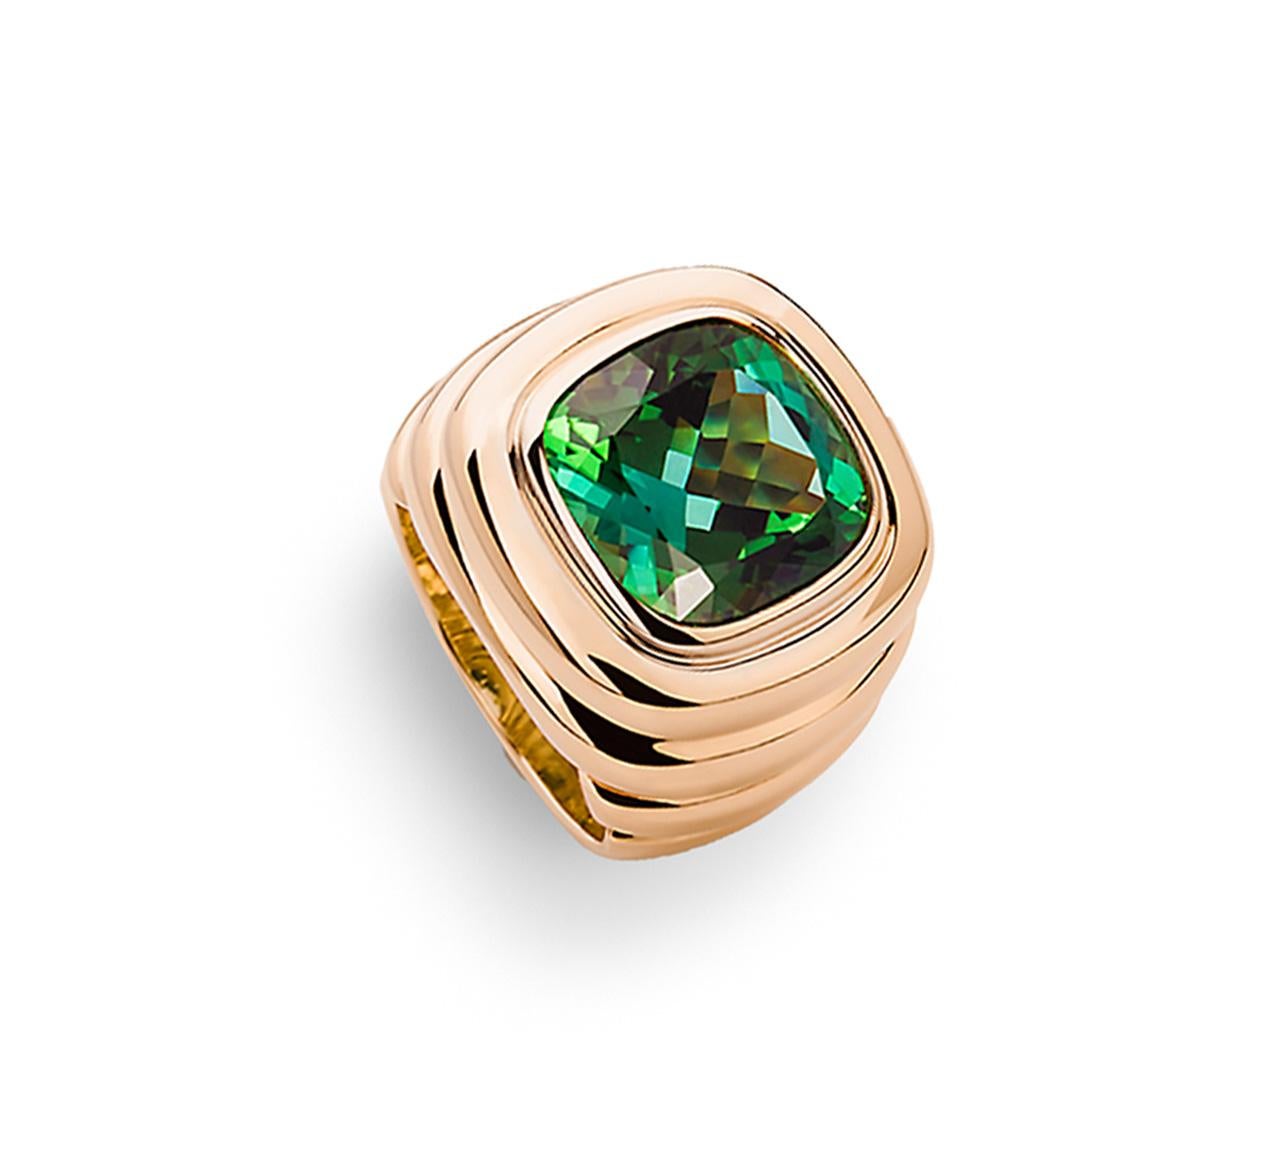 This extraordinary 18k rose gold ring with a absolnthy stunning green tourmaline is from the “middle ages” collection by Colleen B. Rosenblat. 